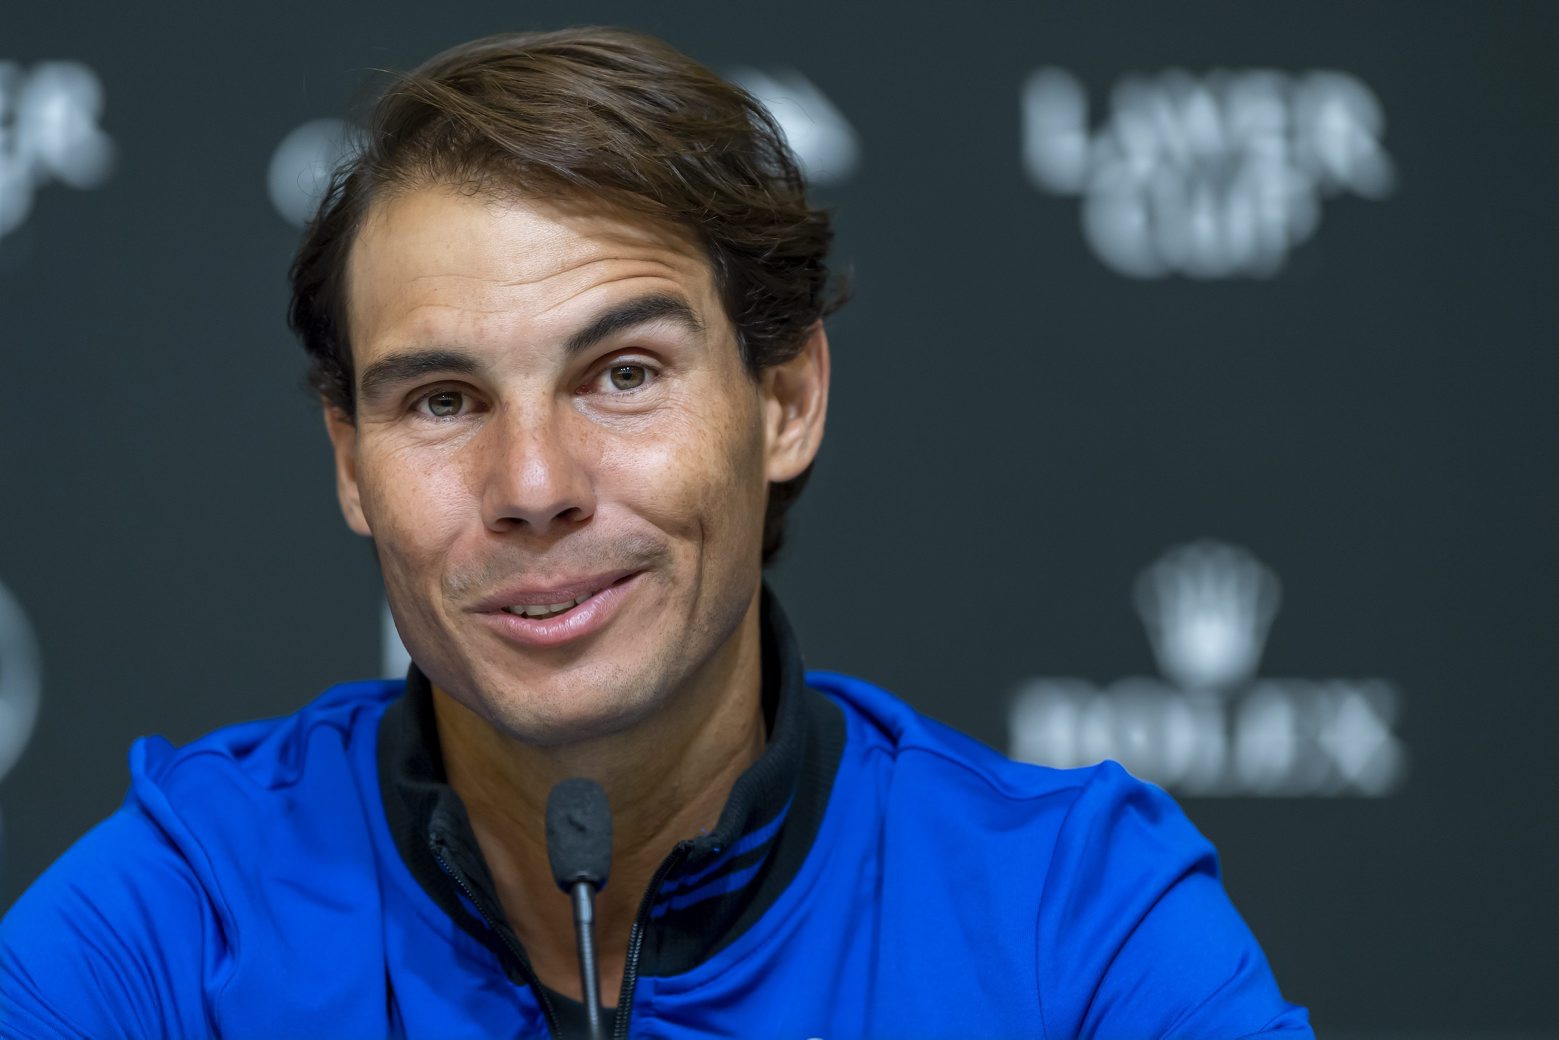 Team Europe, Rafael Nadal, speaks at a press conference during the Laver Cup in Geneva, Switzerland, Thursday, September 19, 2019. The competition will pit a team of the best six European players against the top six from the rest of the world. The Laver Cup edition is scheduled for Sept. 20-22 at the Palexpo in Geneva. The Laver Cup is named after the Australian tennis legend Rod Laver. (KEYSTONE/Martial Trezzini) SWITZERLAND TENNIS LAVER CUP PRESSE